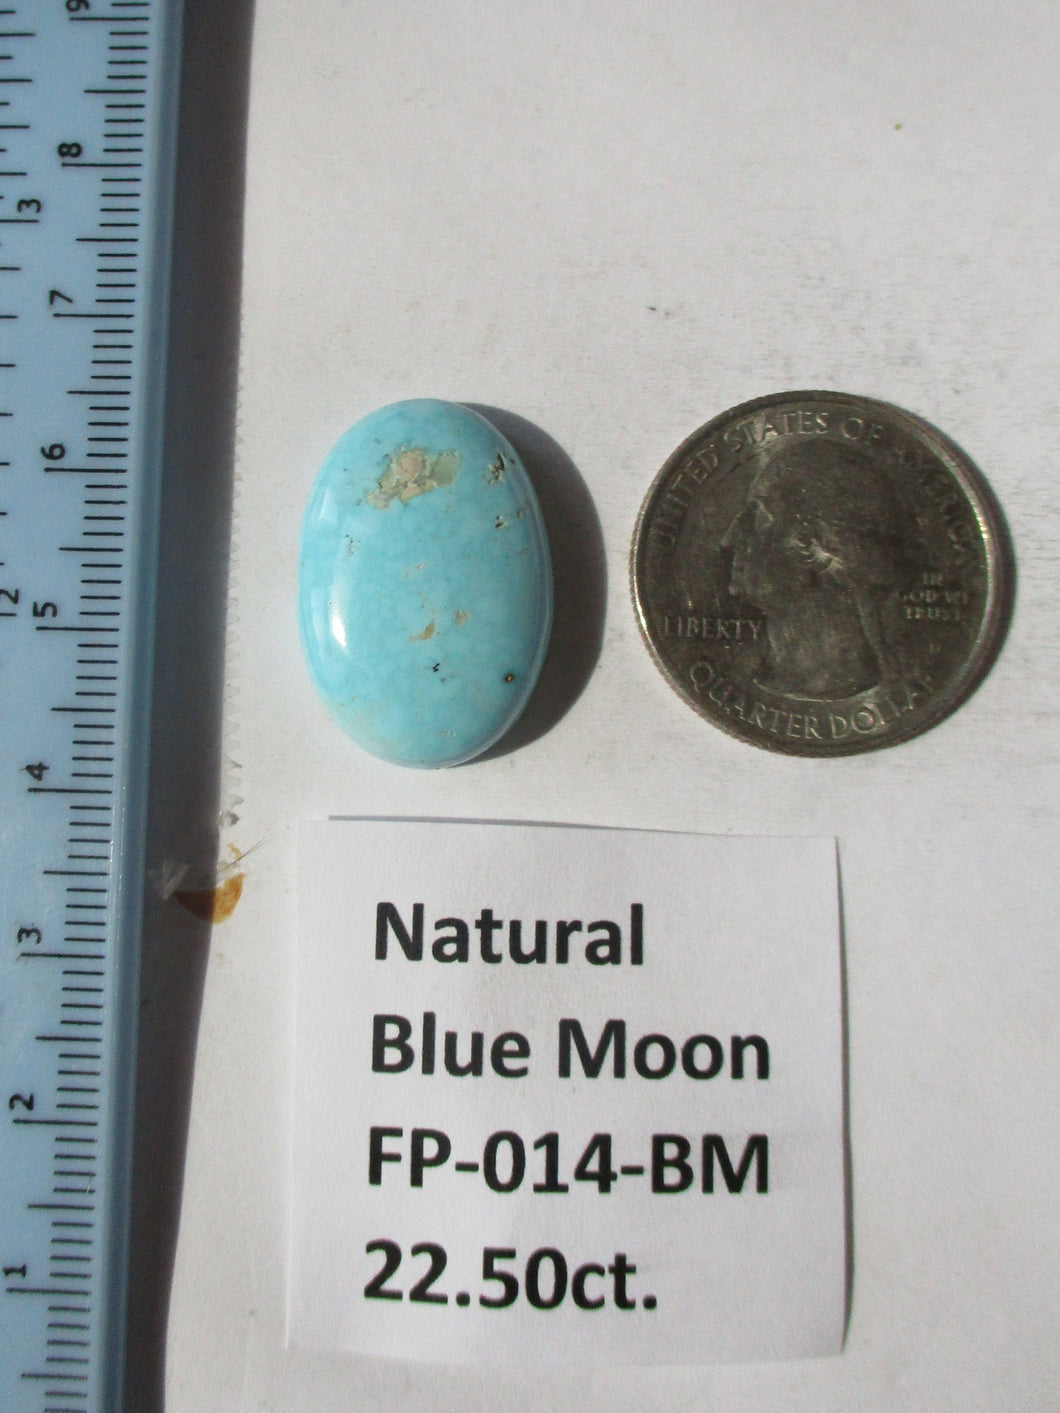 22.5 ct. (24x17x7 mm) 100% Natural Blue Moon Turquoise Cabochon Gemstone, # FP 014